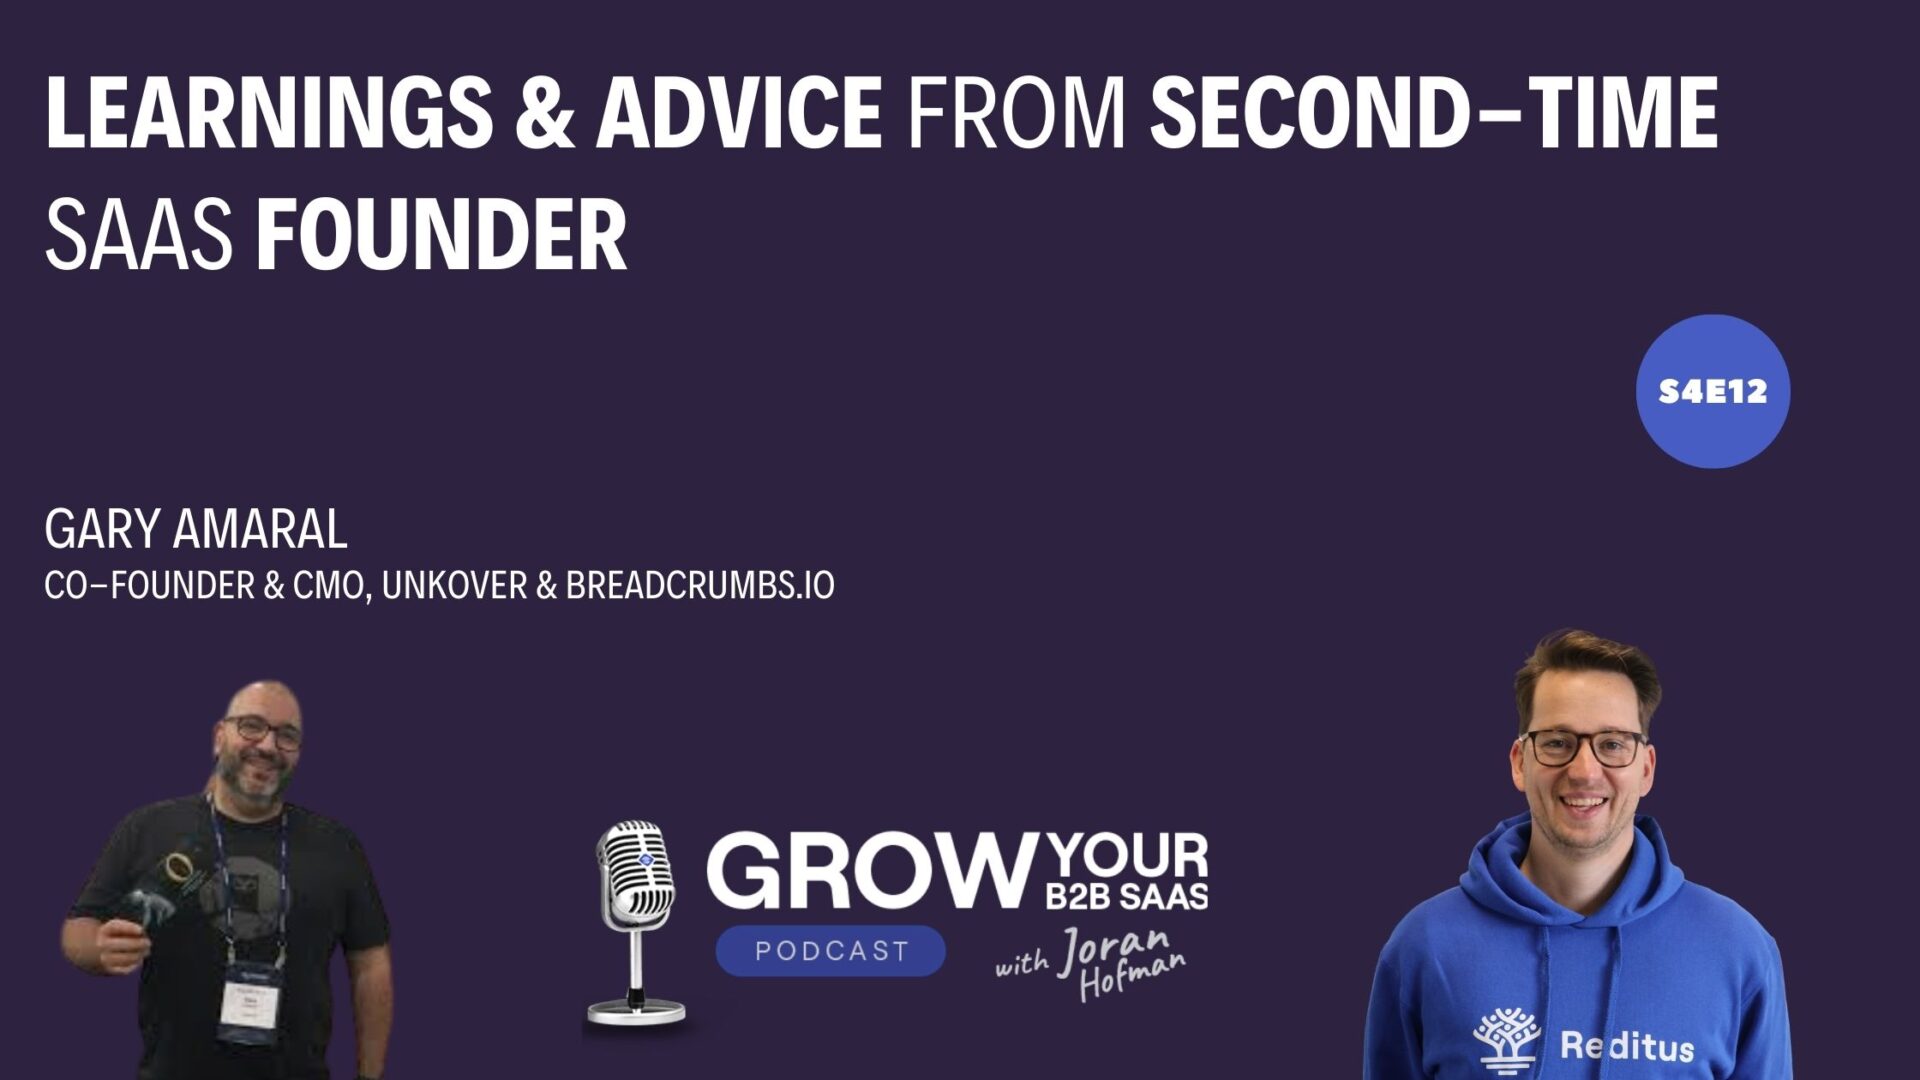 https://www.getreditus.com/podcast/s4e12-learnings-advice-from-second-time-saas-founder-with-gary-amarall/